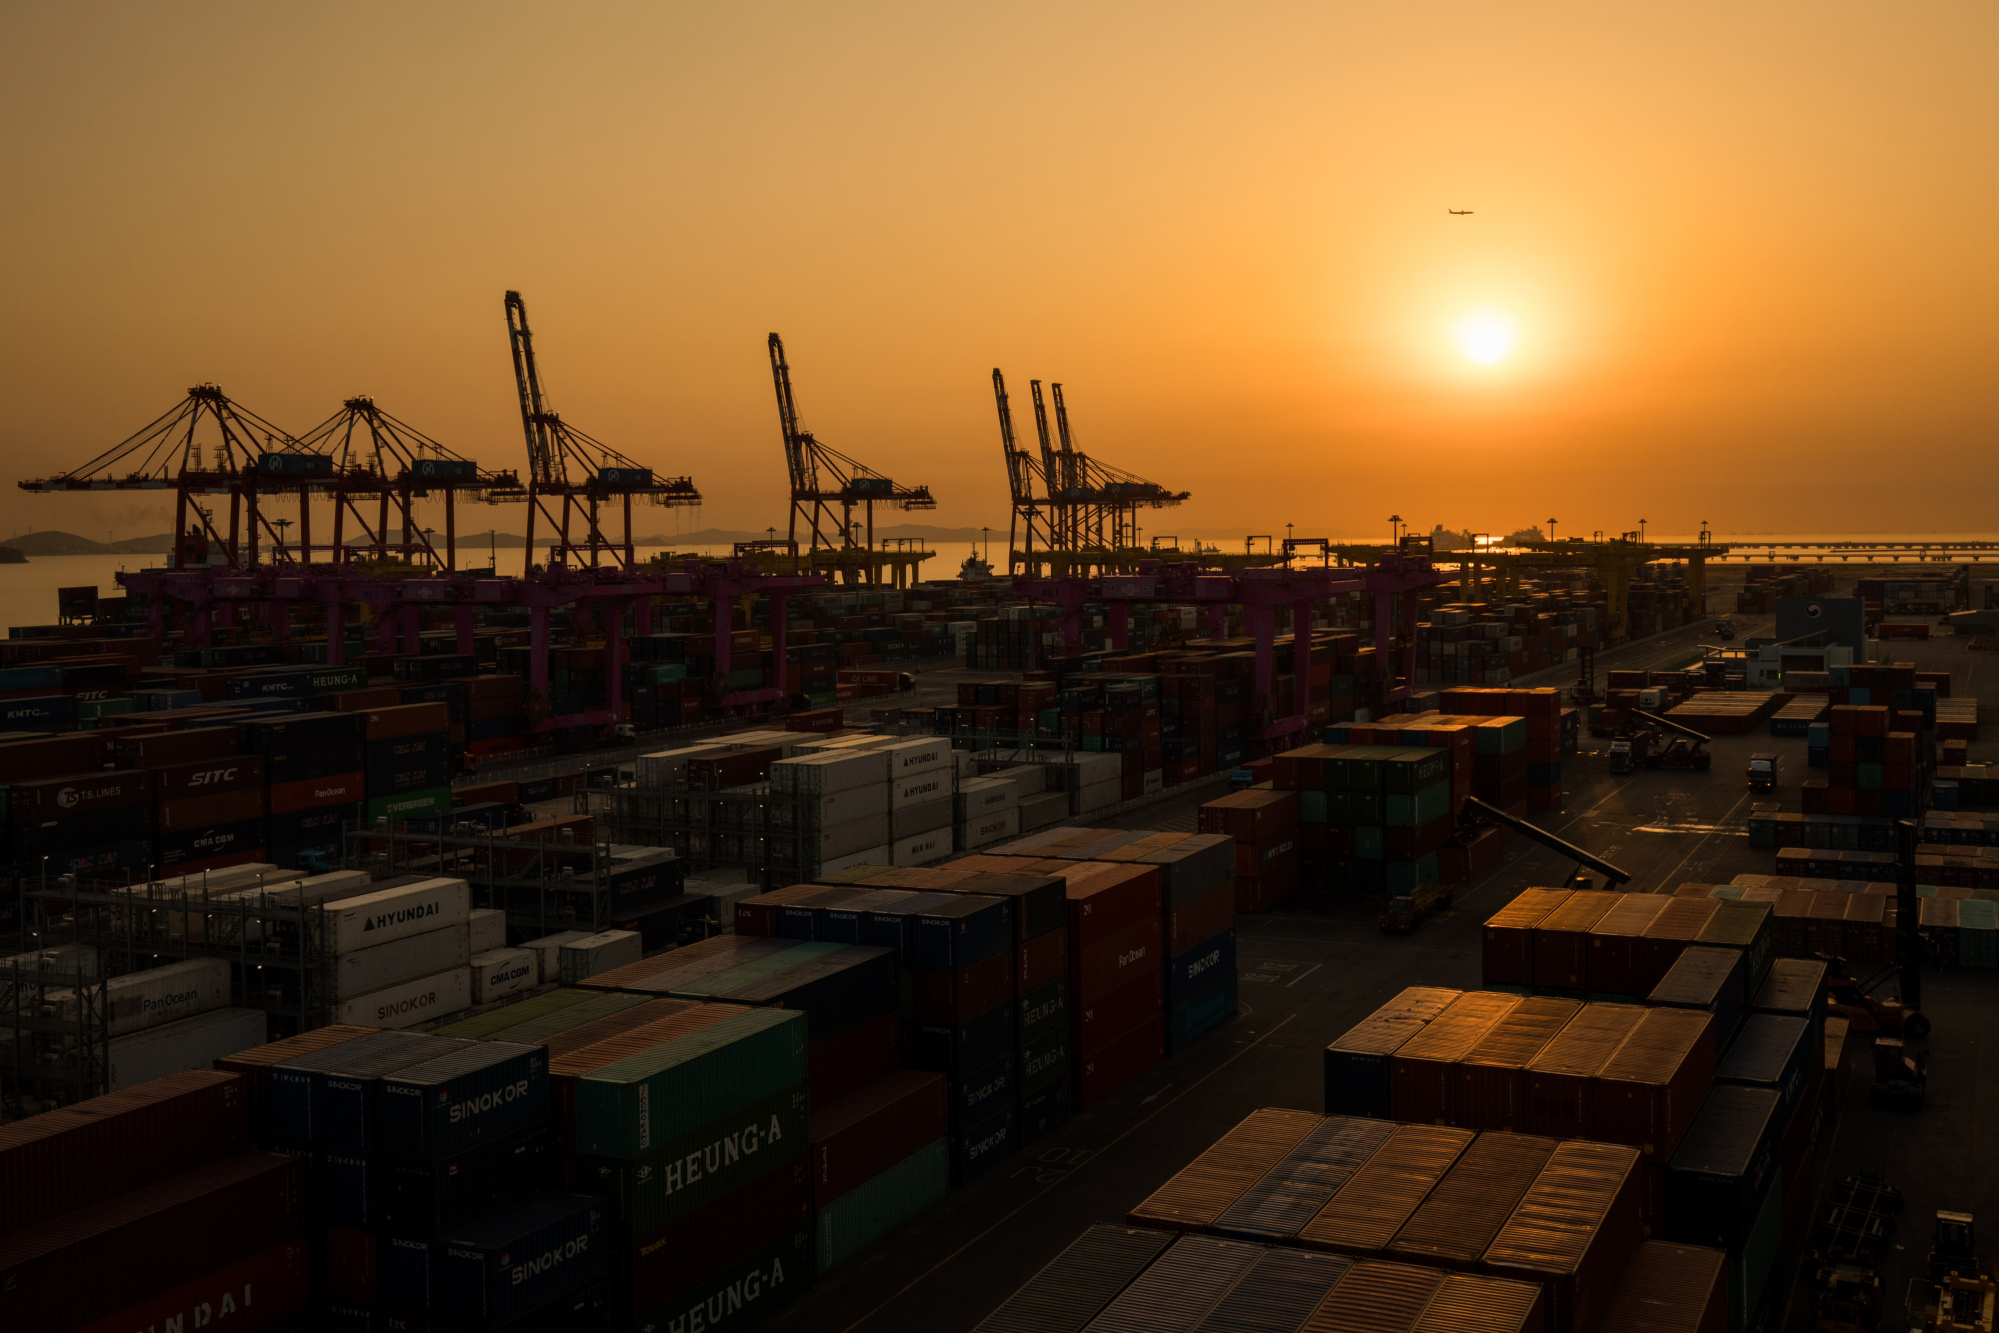 Operations At Sun Kwang Newport Container Terminal (SNCT) And Port Of Incheon As Trump Draws Global Condemnation With Talk of Impending Tariffs